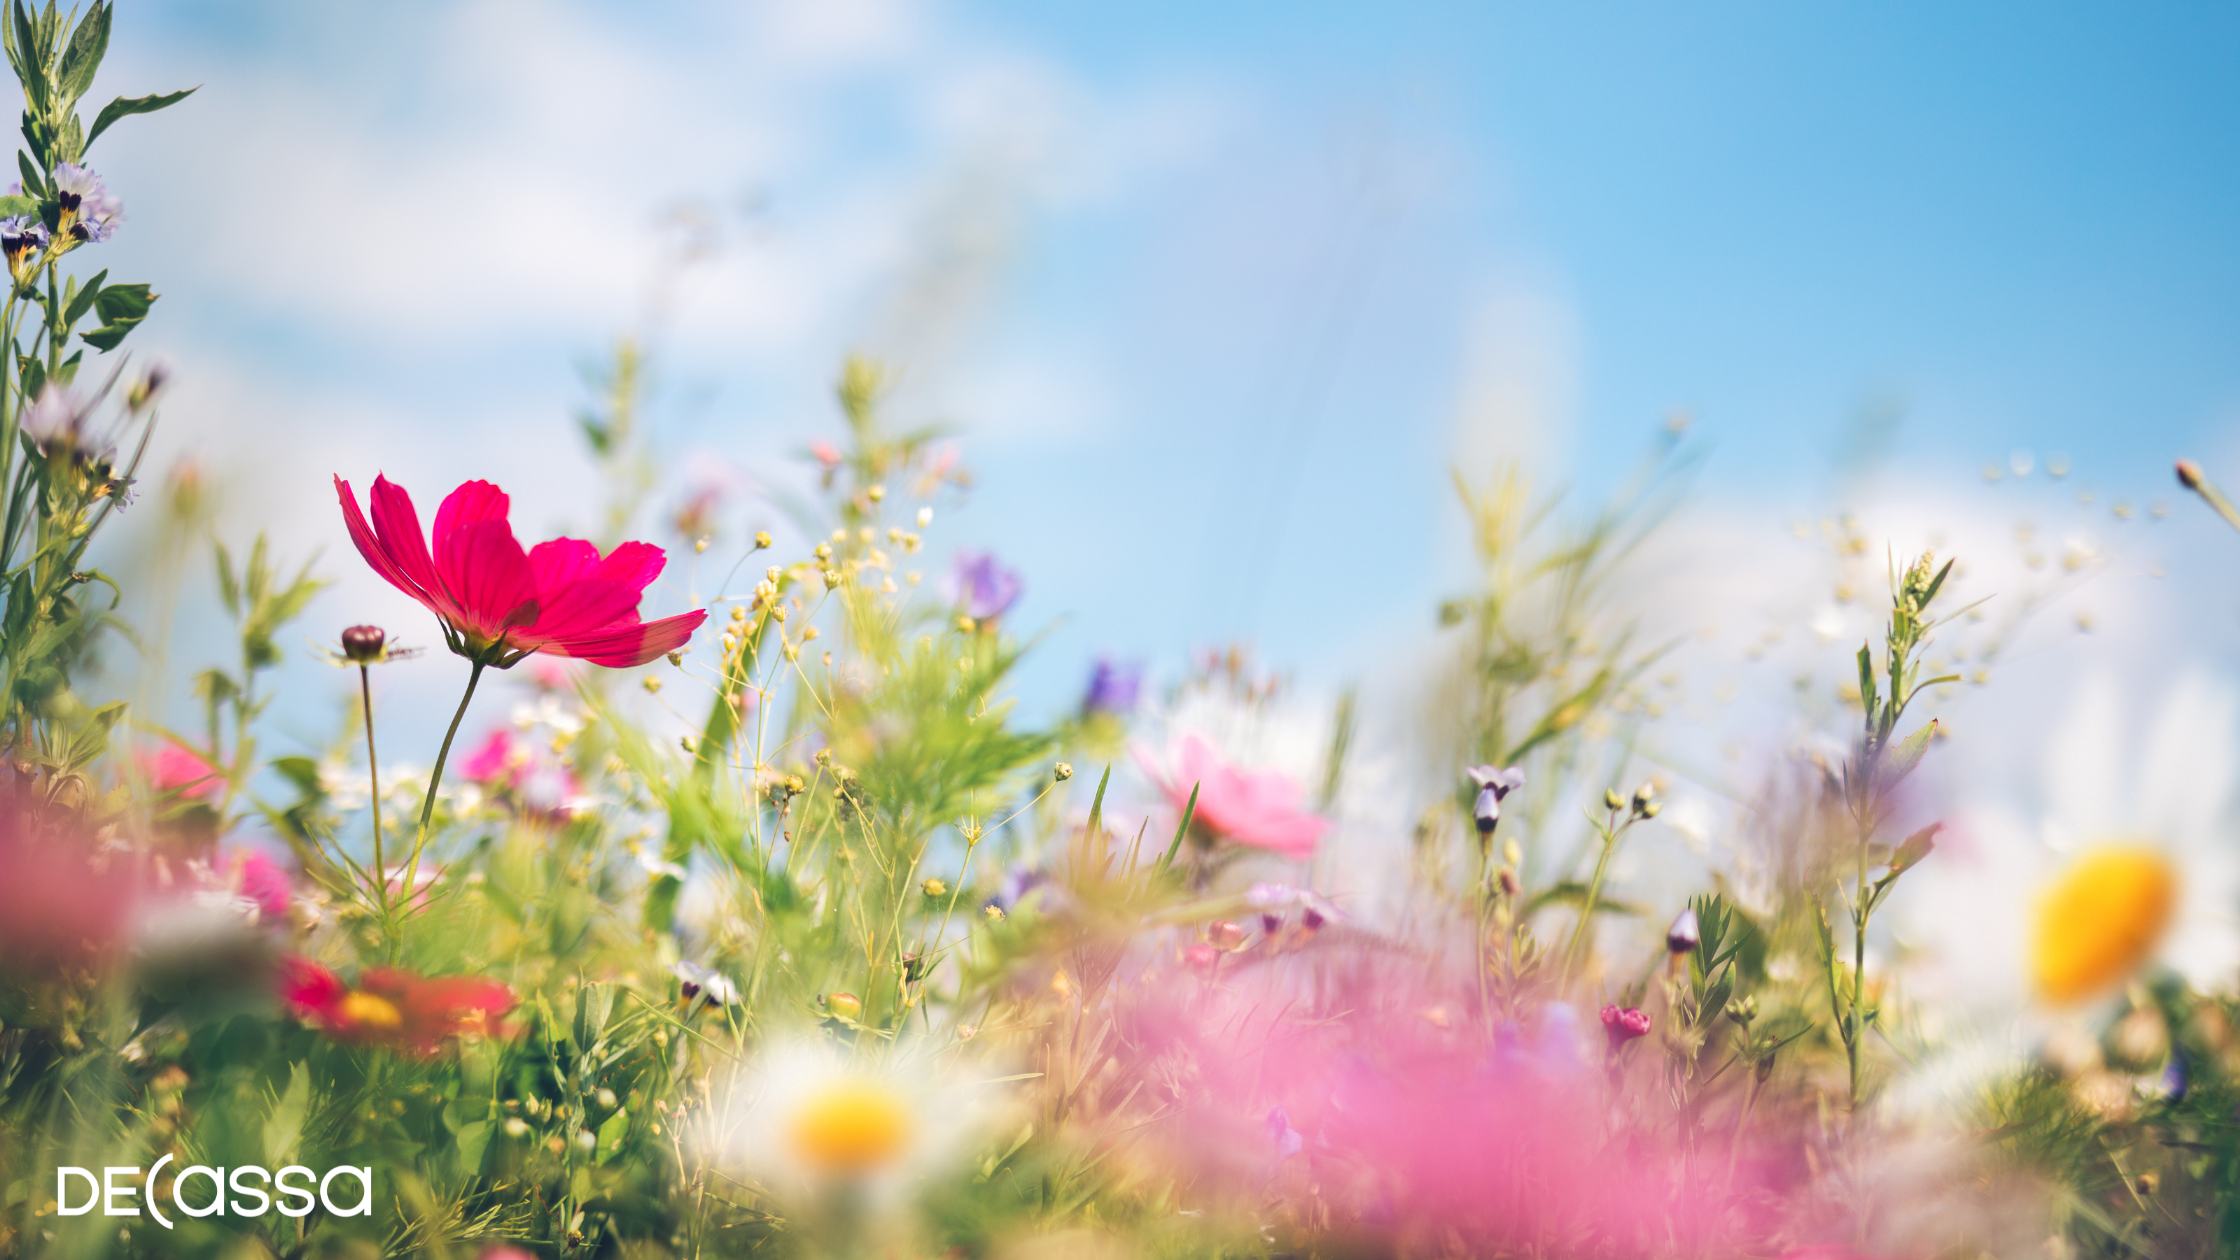 Pink Flowers and Daisy's amid long grass with a background of blue sky